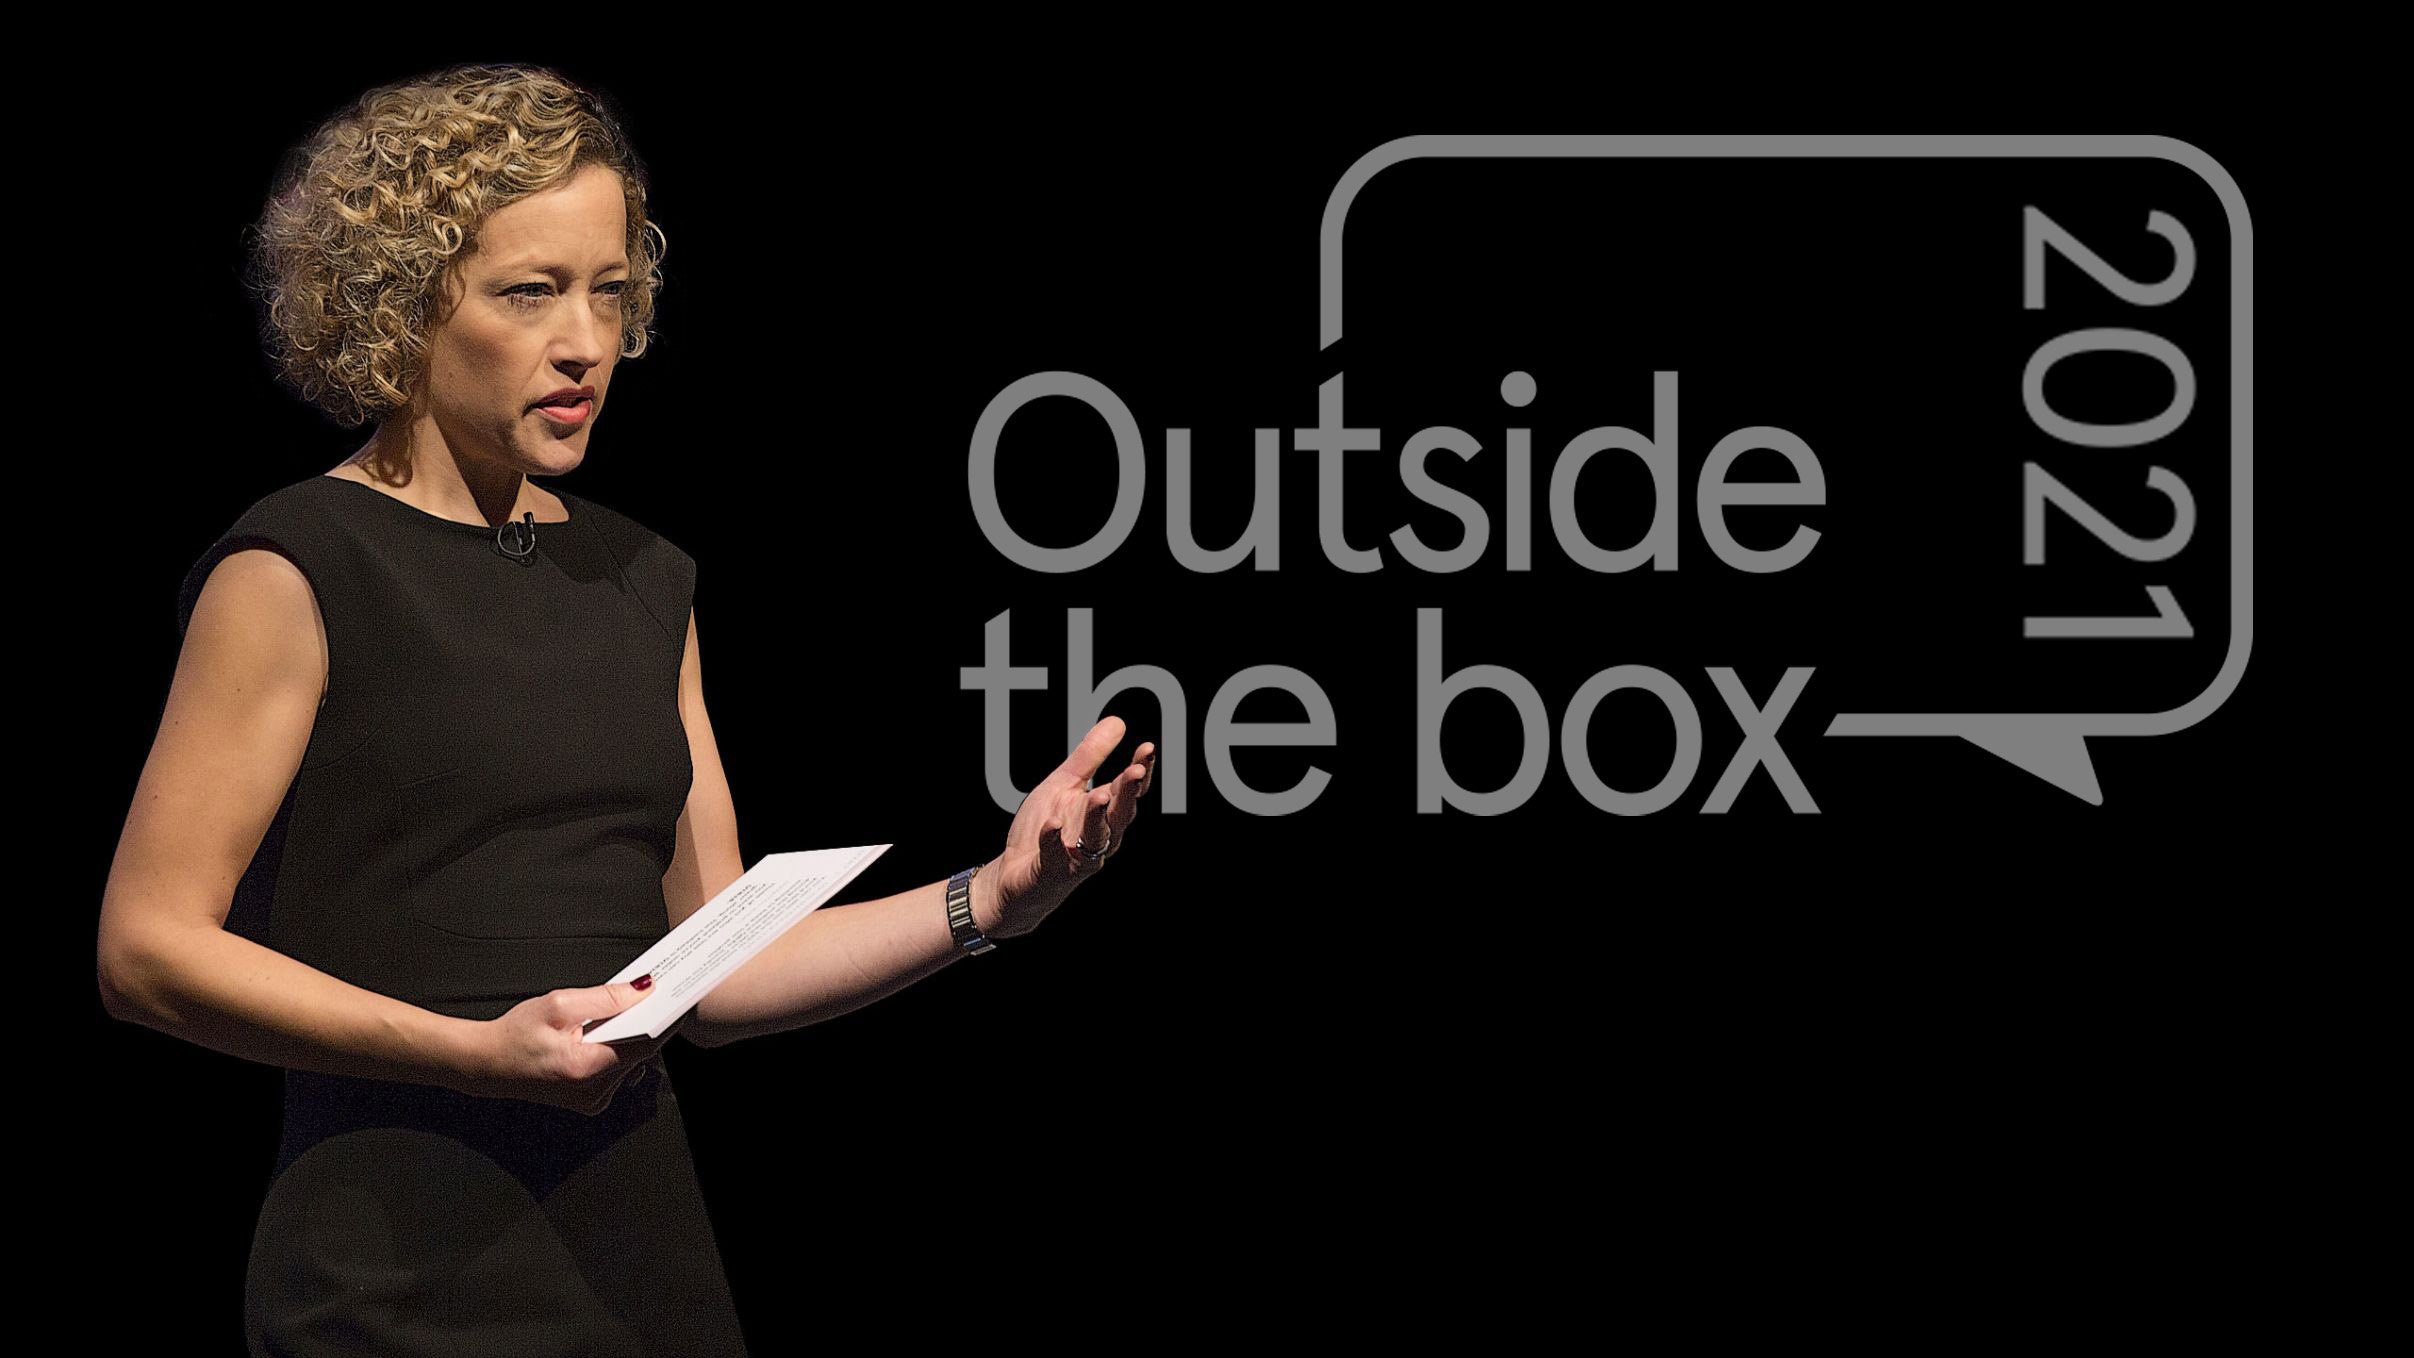 Cathy Newman presents Outside the box 2021